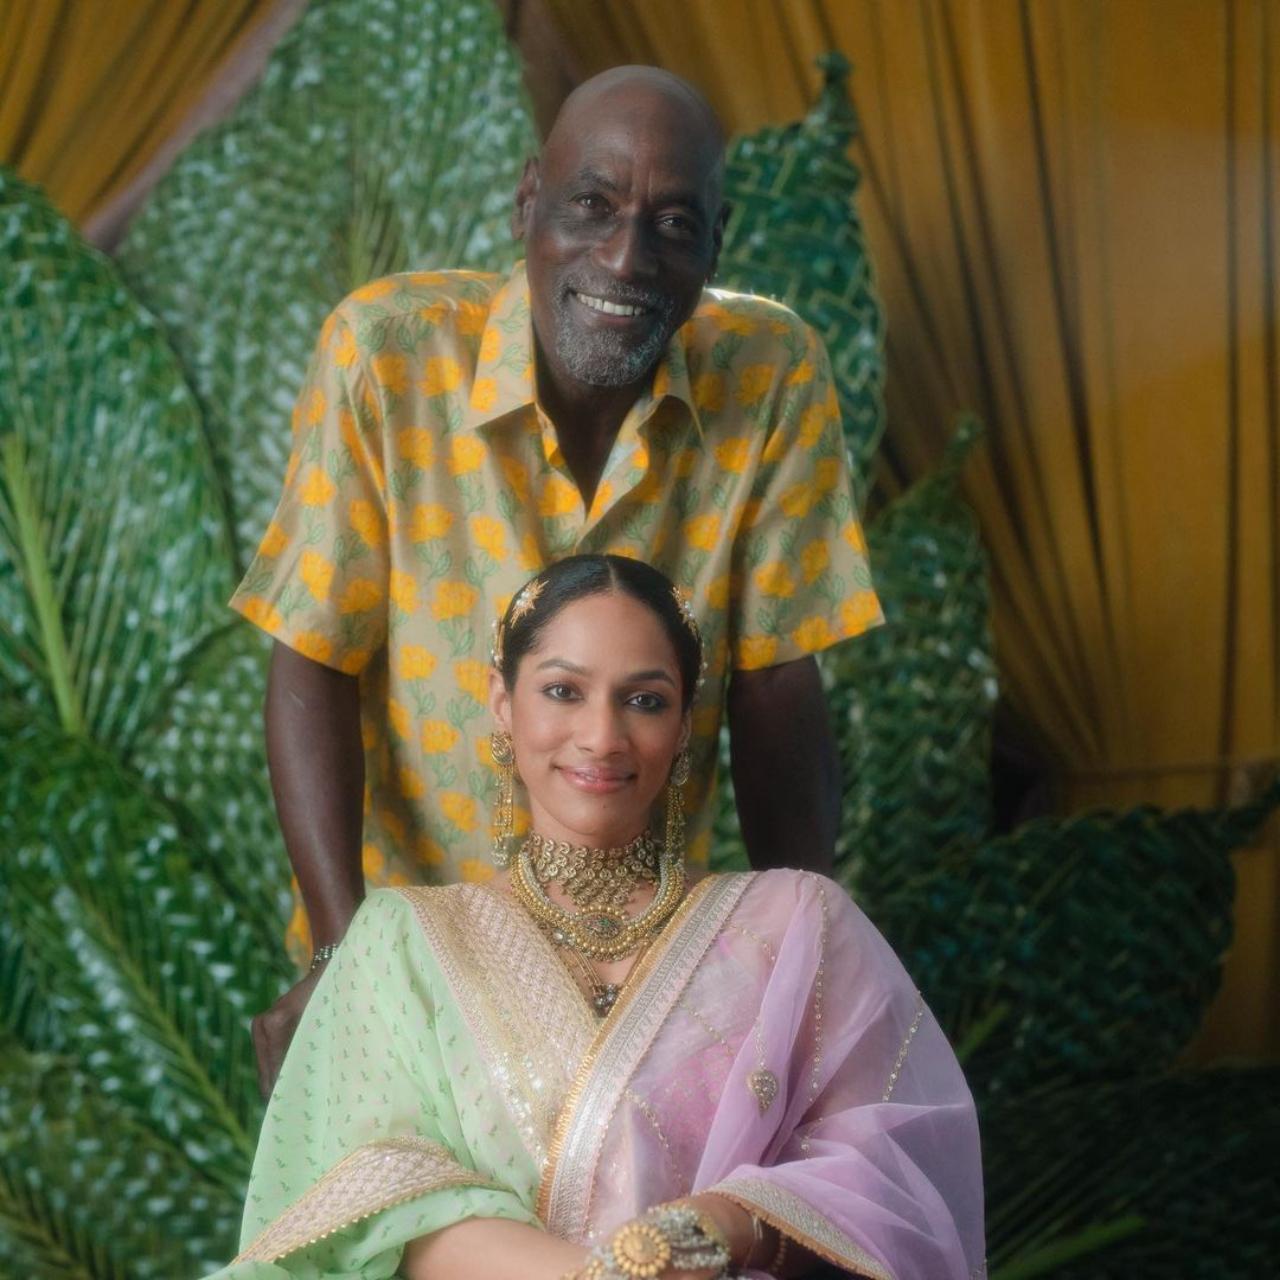 Sir Vivian Richards, who is Masaba's father, also joined the wedding celebrations. All family members were seen dressed in Masaba's House Of Masaba collection